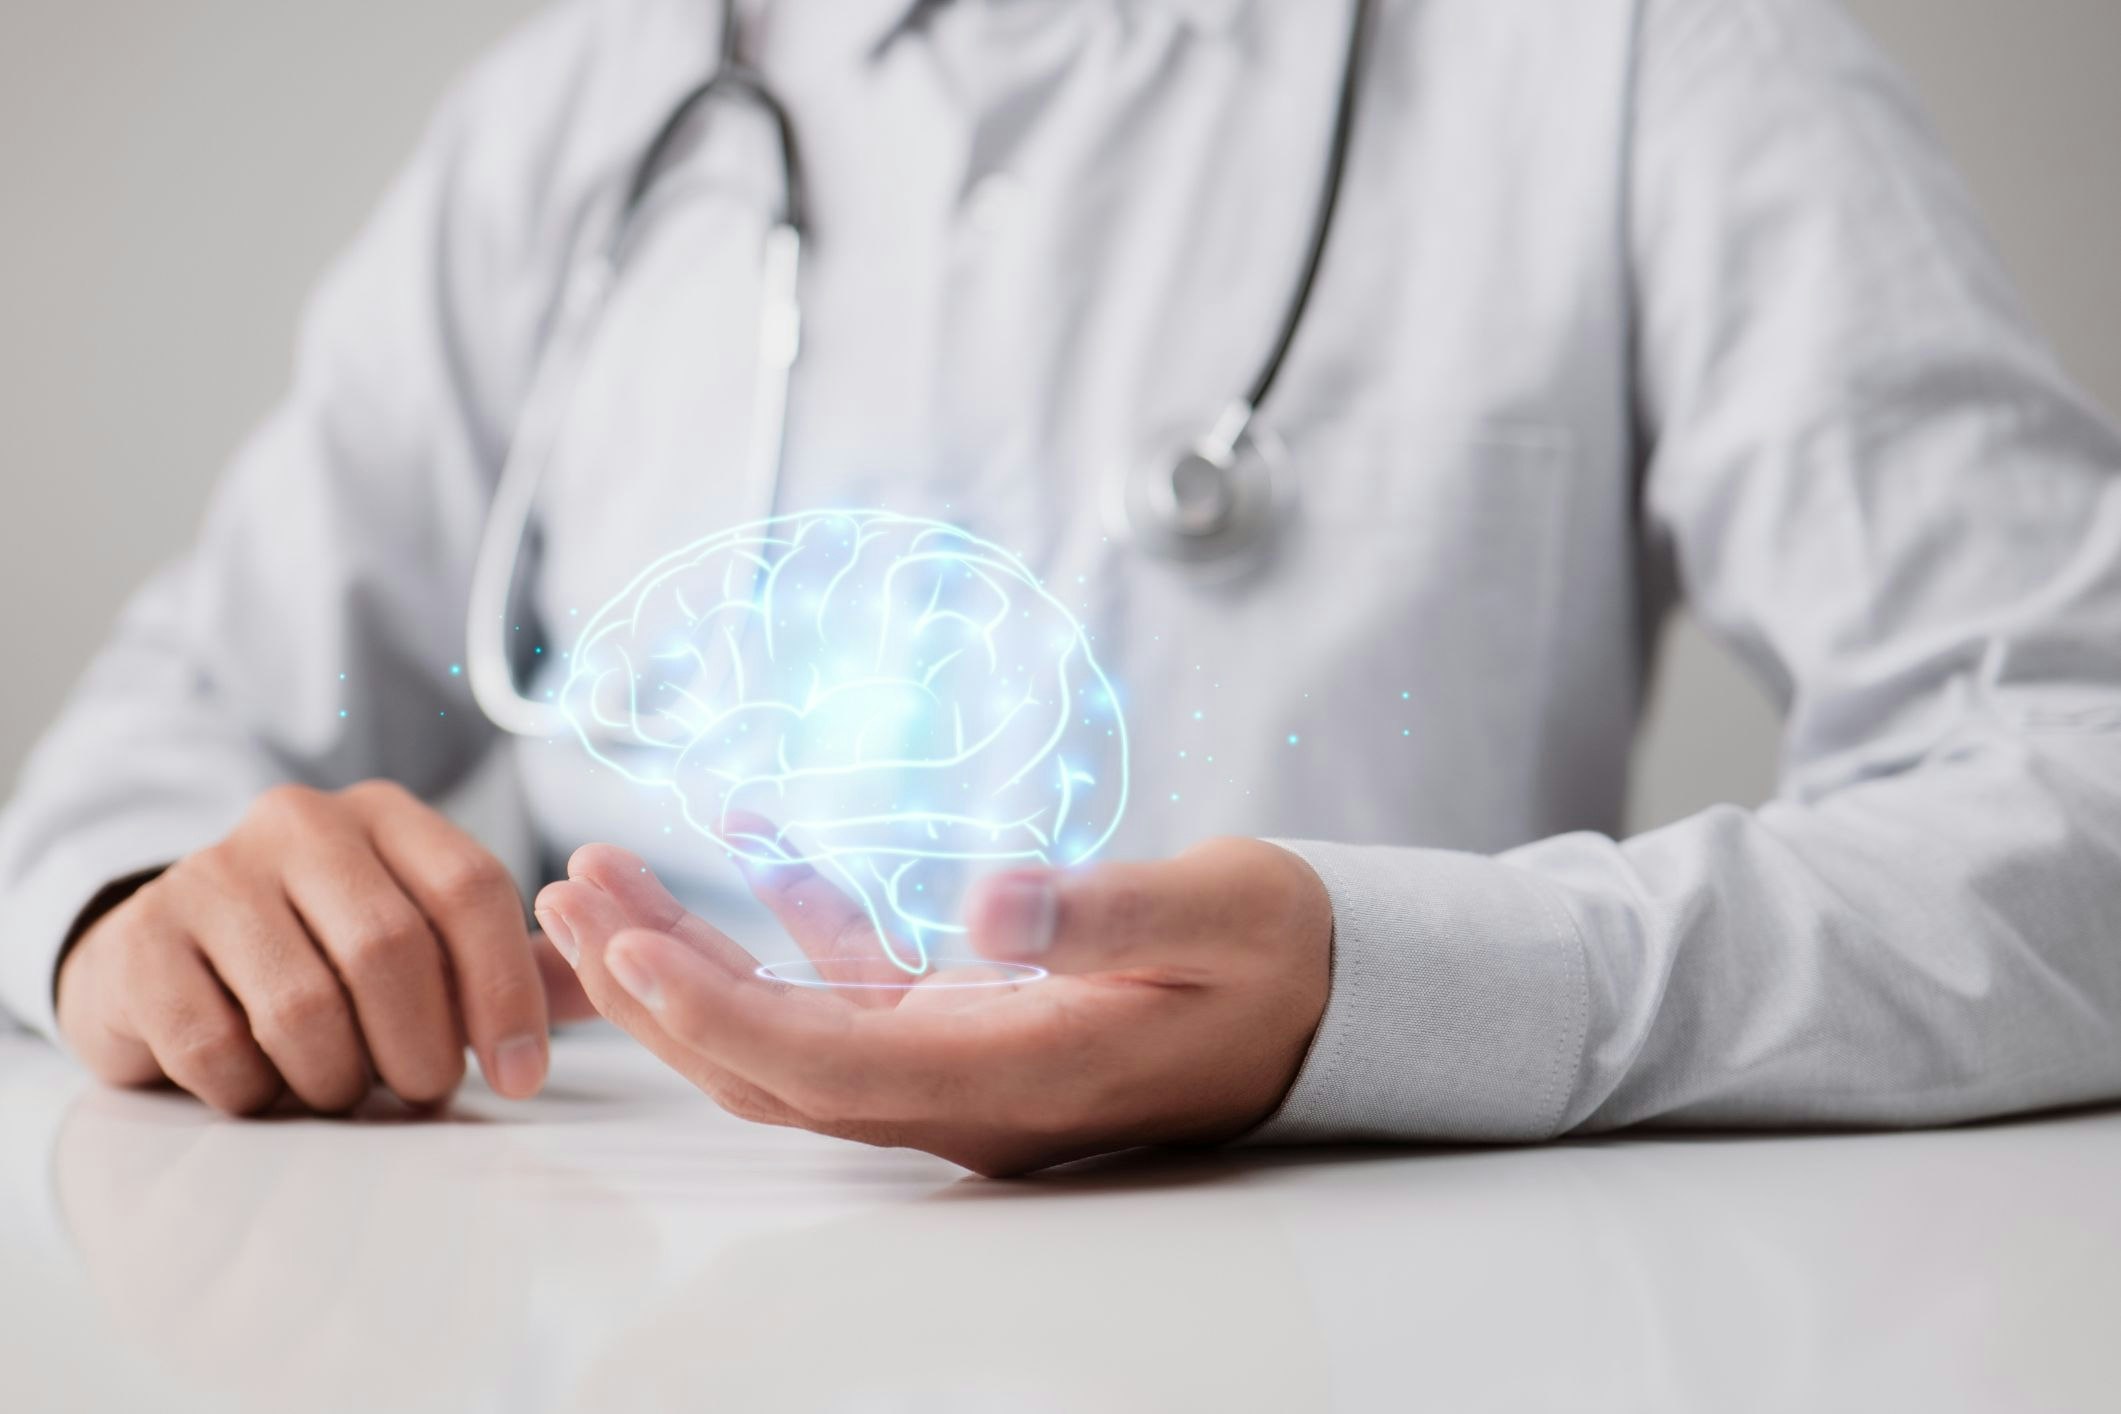 <p>A national summit about neurological conditions and change required in the healthcare system is being held to ensure that affected Australians get appropriate care. [Source: Shutterstock]</p>
